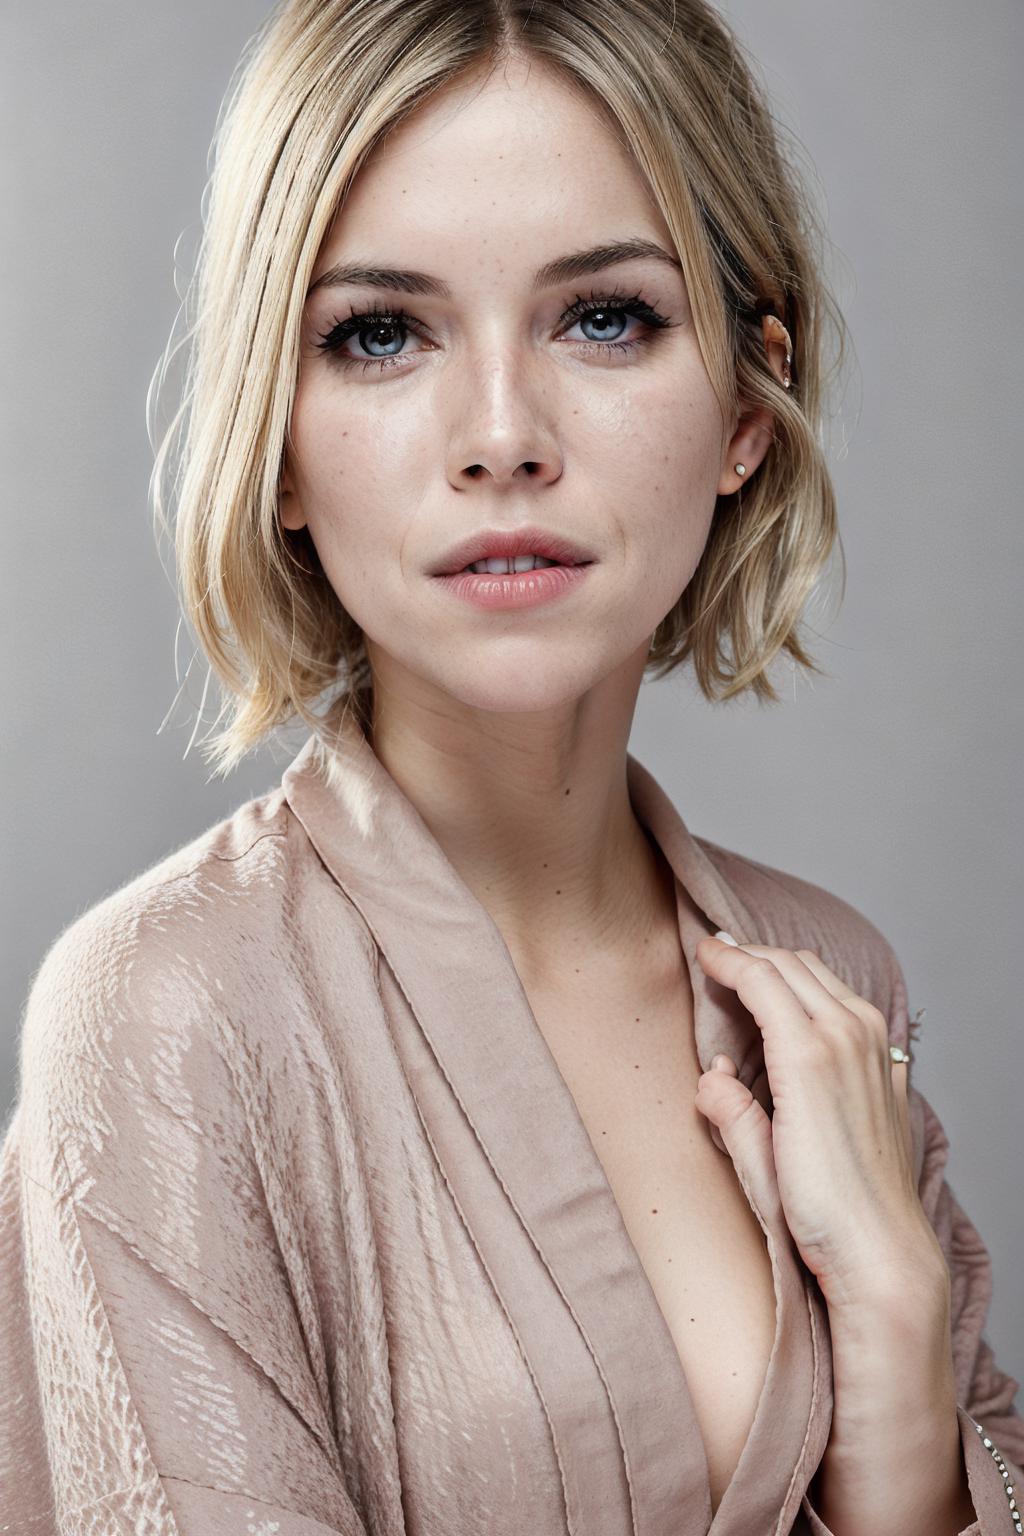 Sienna Miller Lora image by ghostintheshell